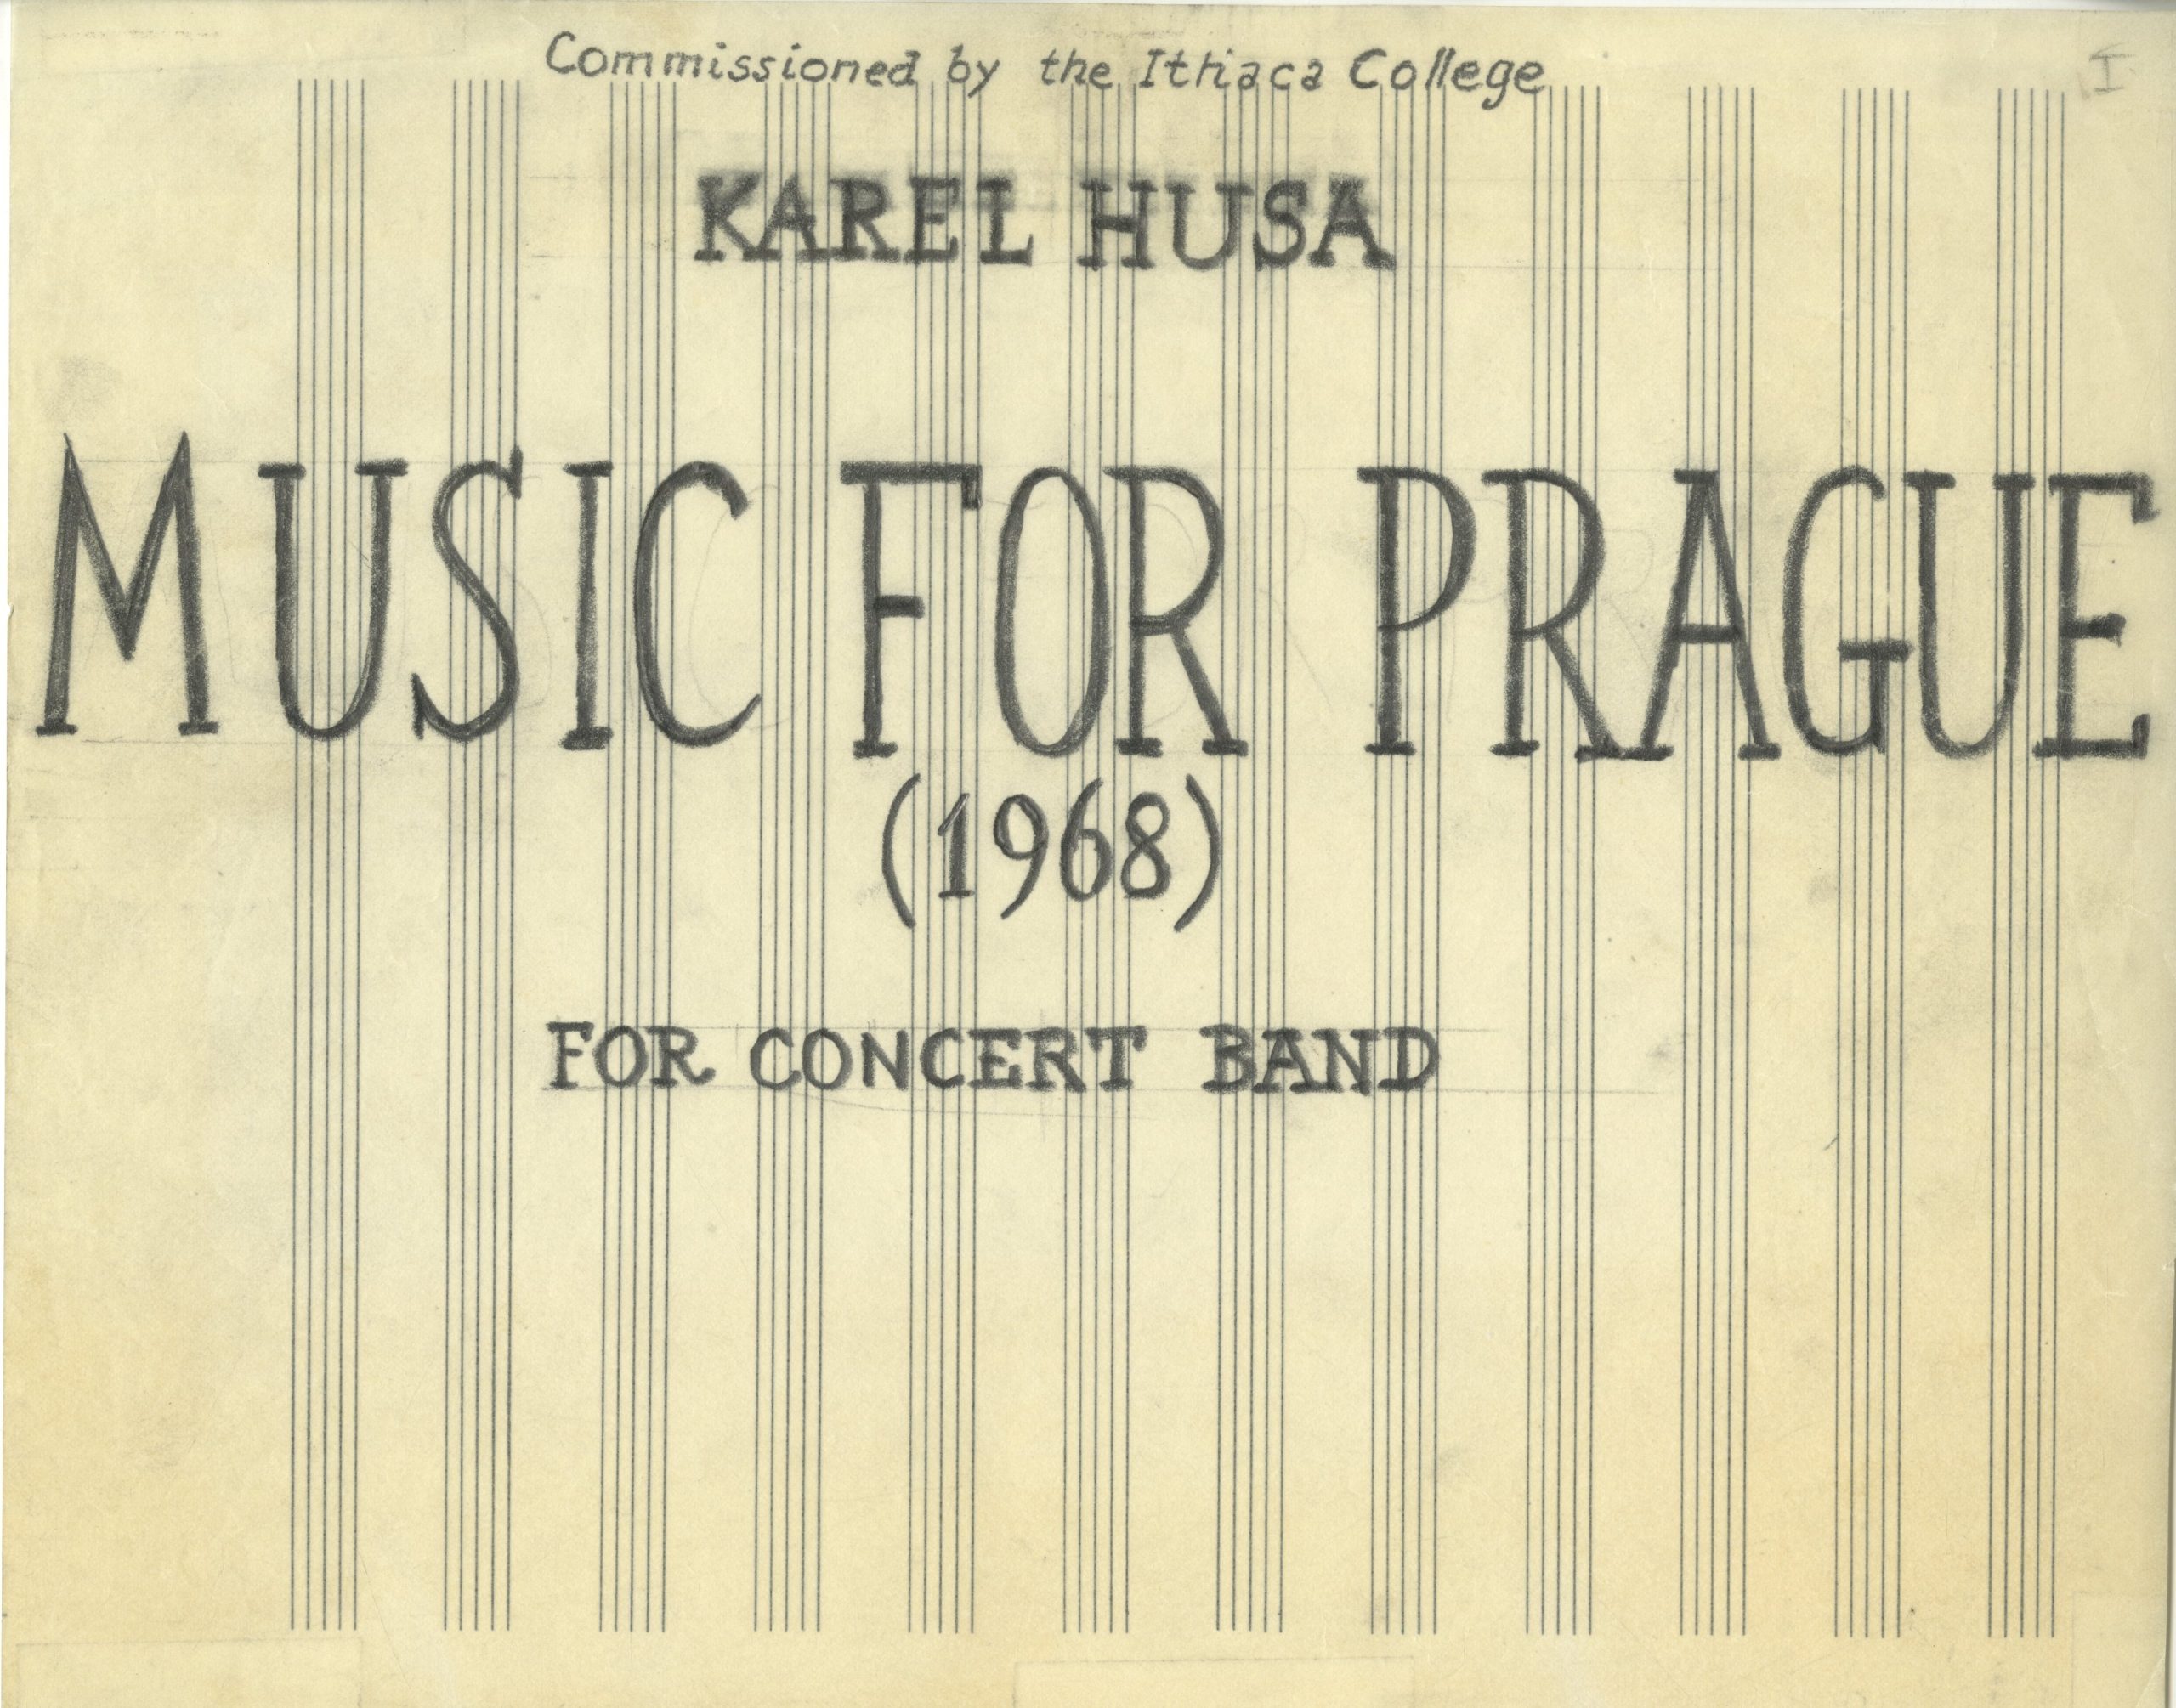 Title page for Music for Prague 1968.